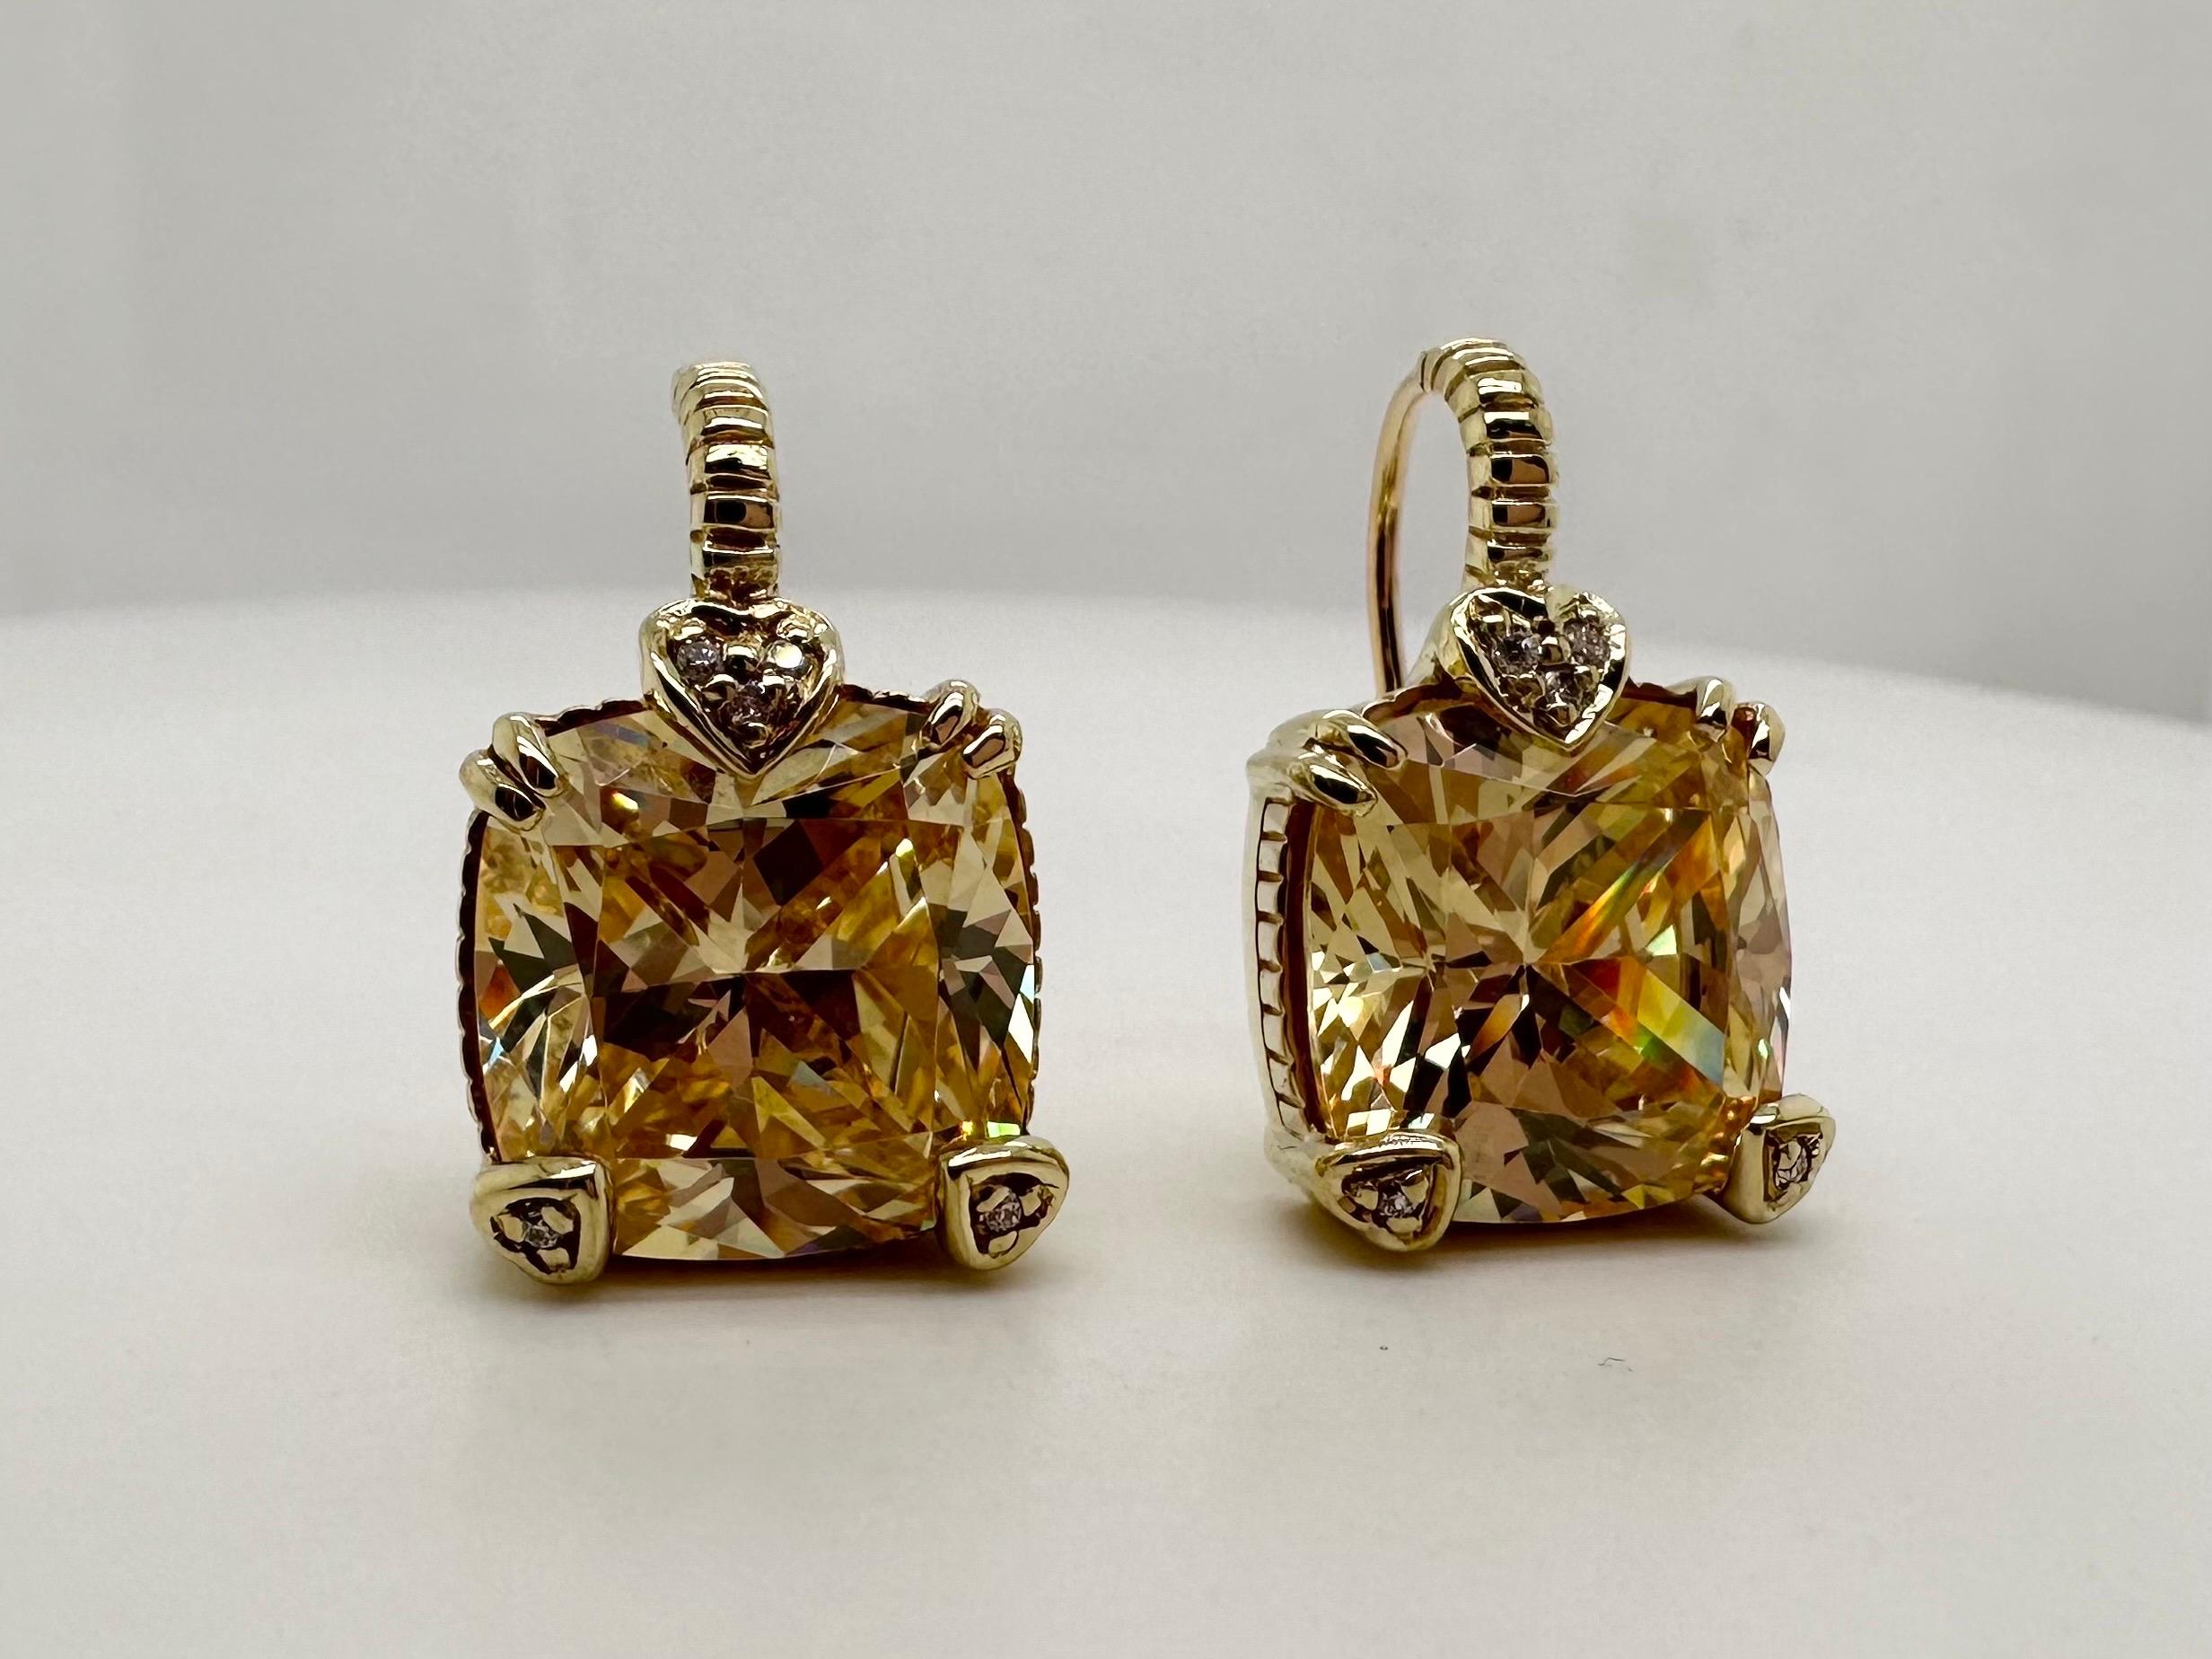 Cocktail earrings with natural diamonds and a center cubic made in 18KT yellow gold. 

Certificate of authenticity comes with purchase

ABOUT US
We are a family-owned business. Our studio in located in the heart of Boca Raton at the International